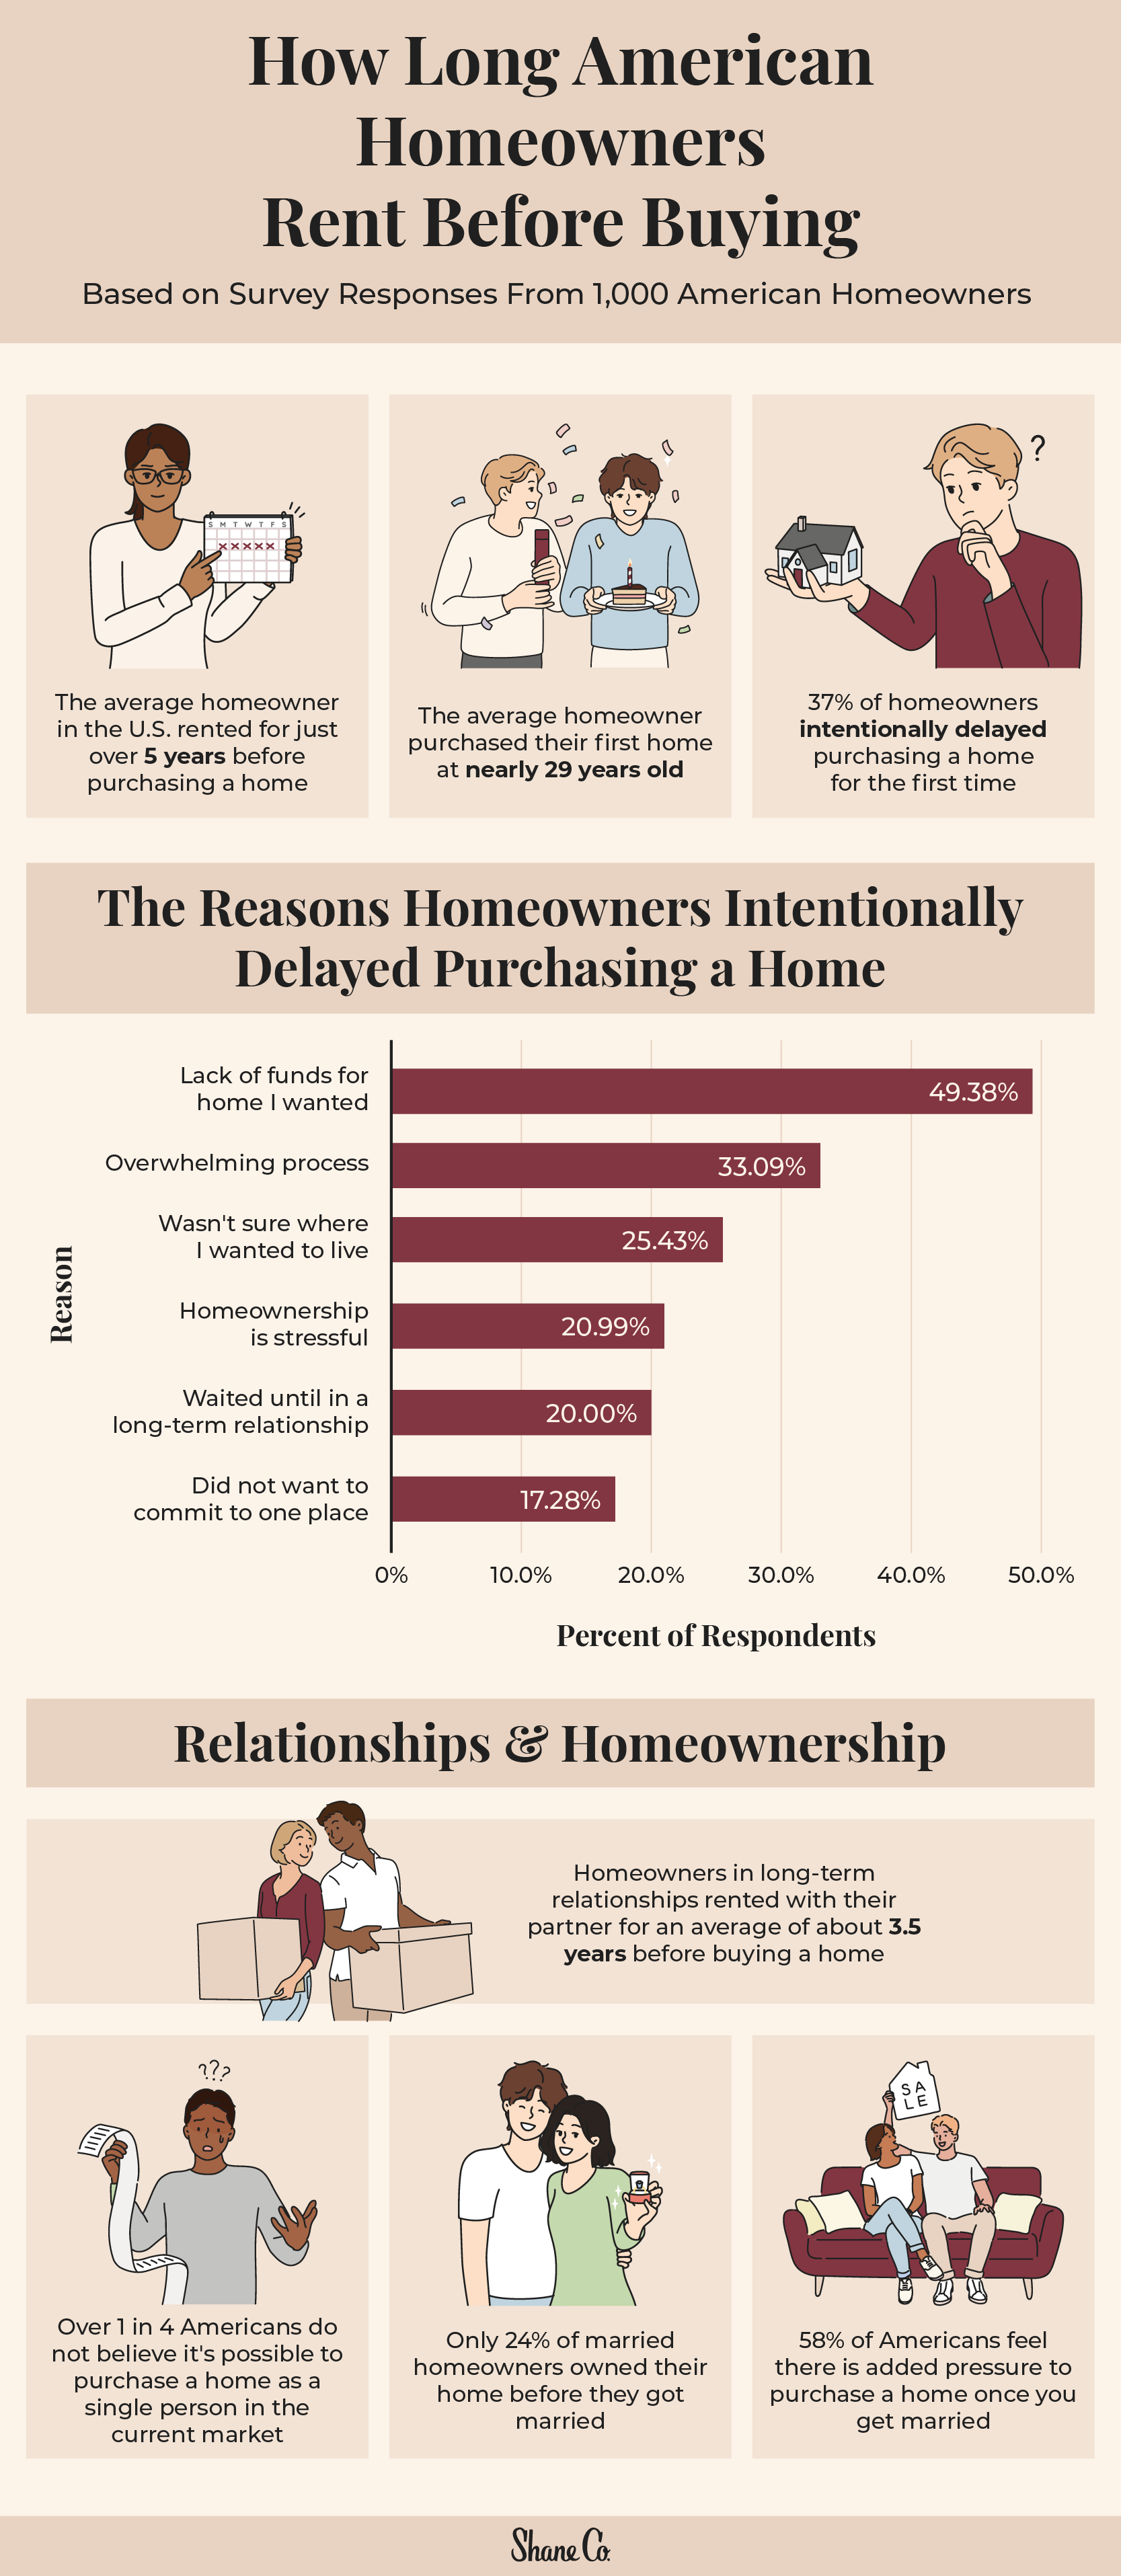 An infographic showing survey insights on how long Americans rent before buying a home